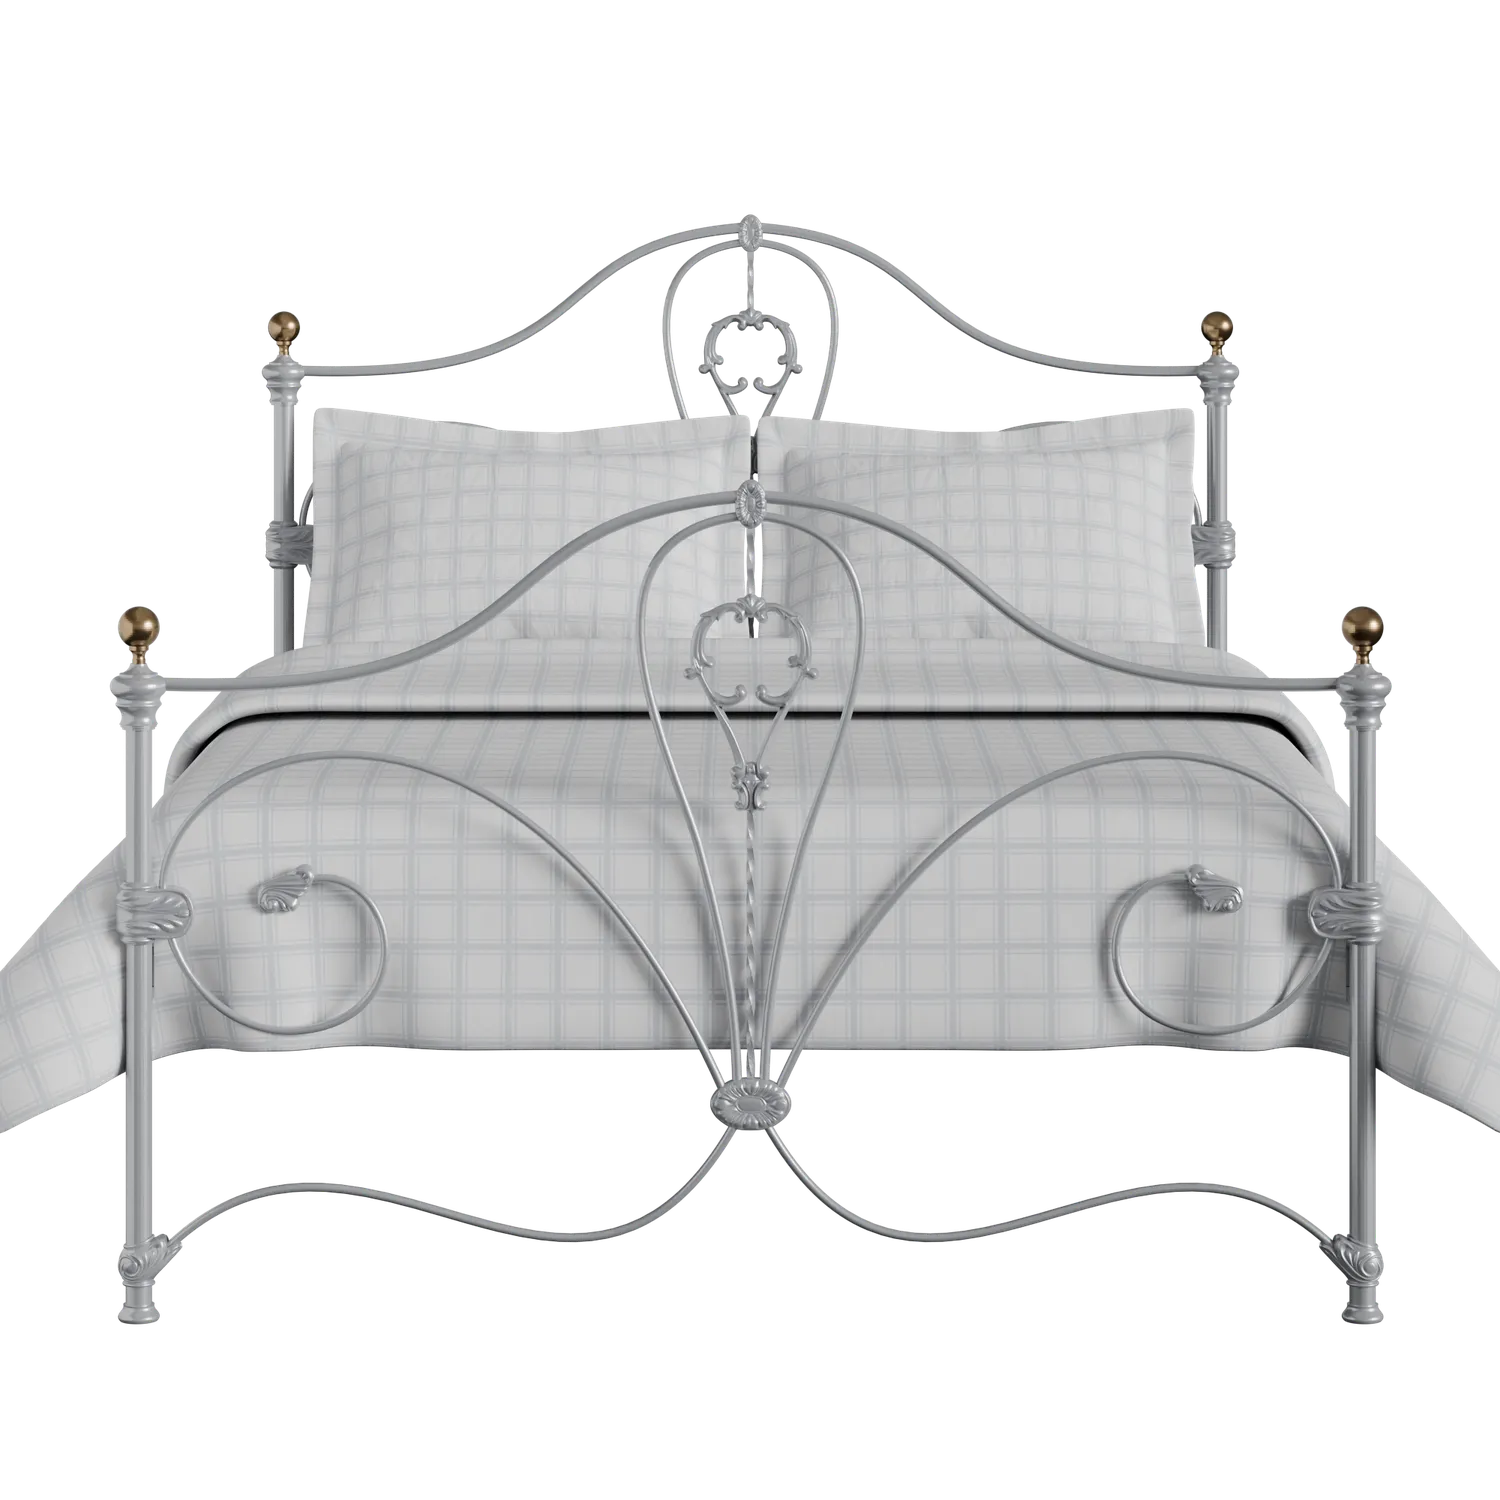 Melrose iron/metal bed in silver